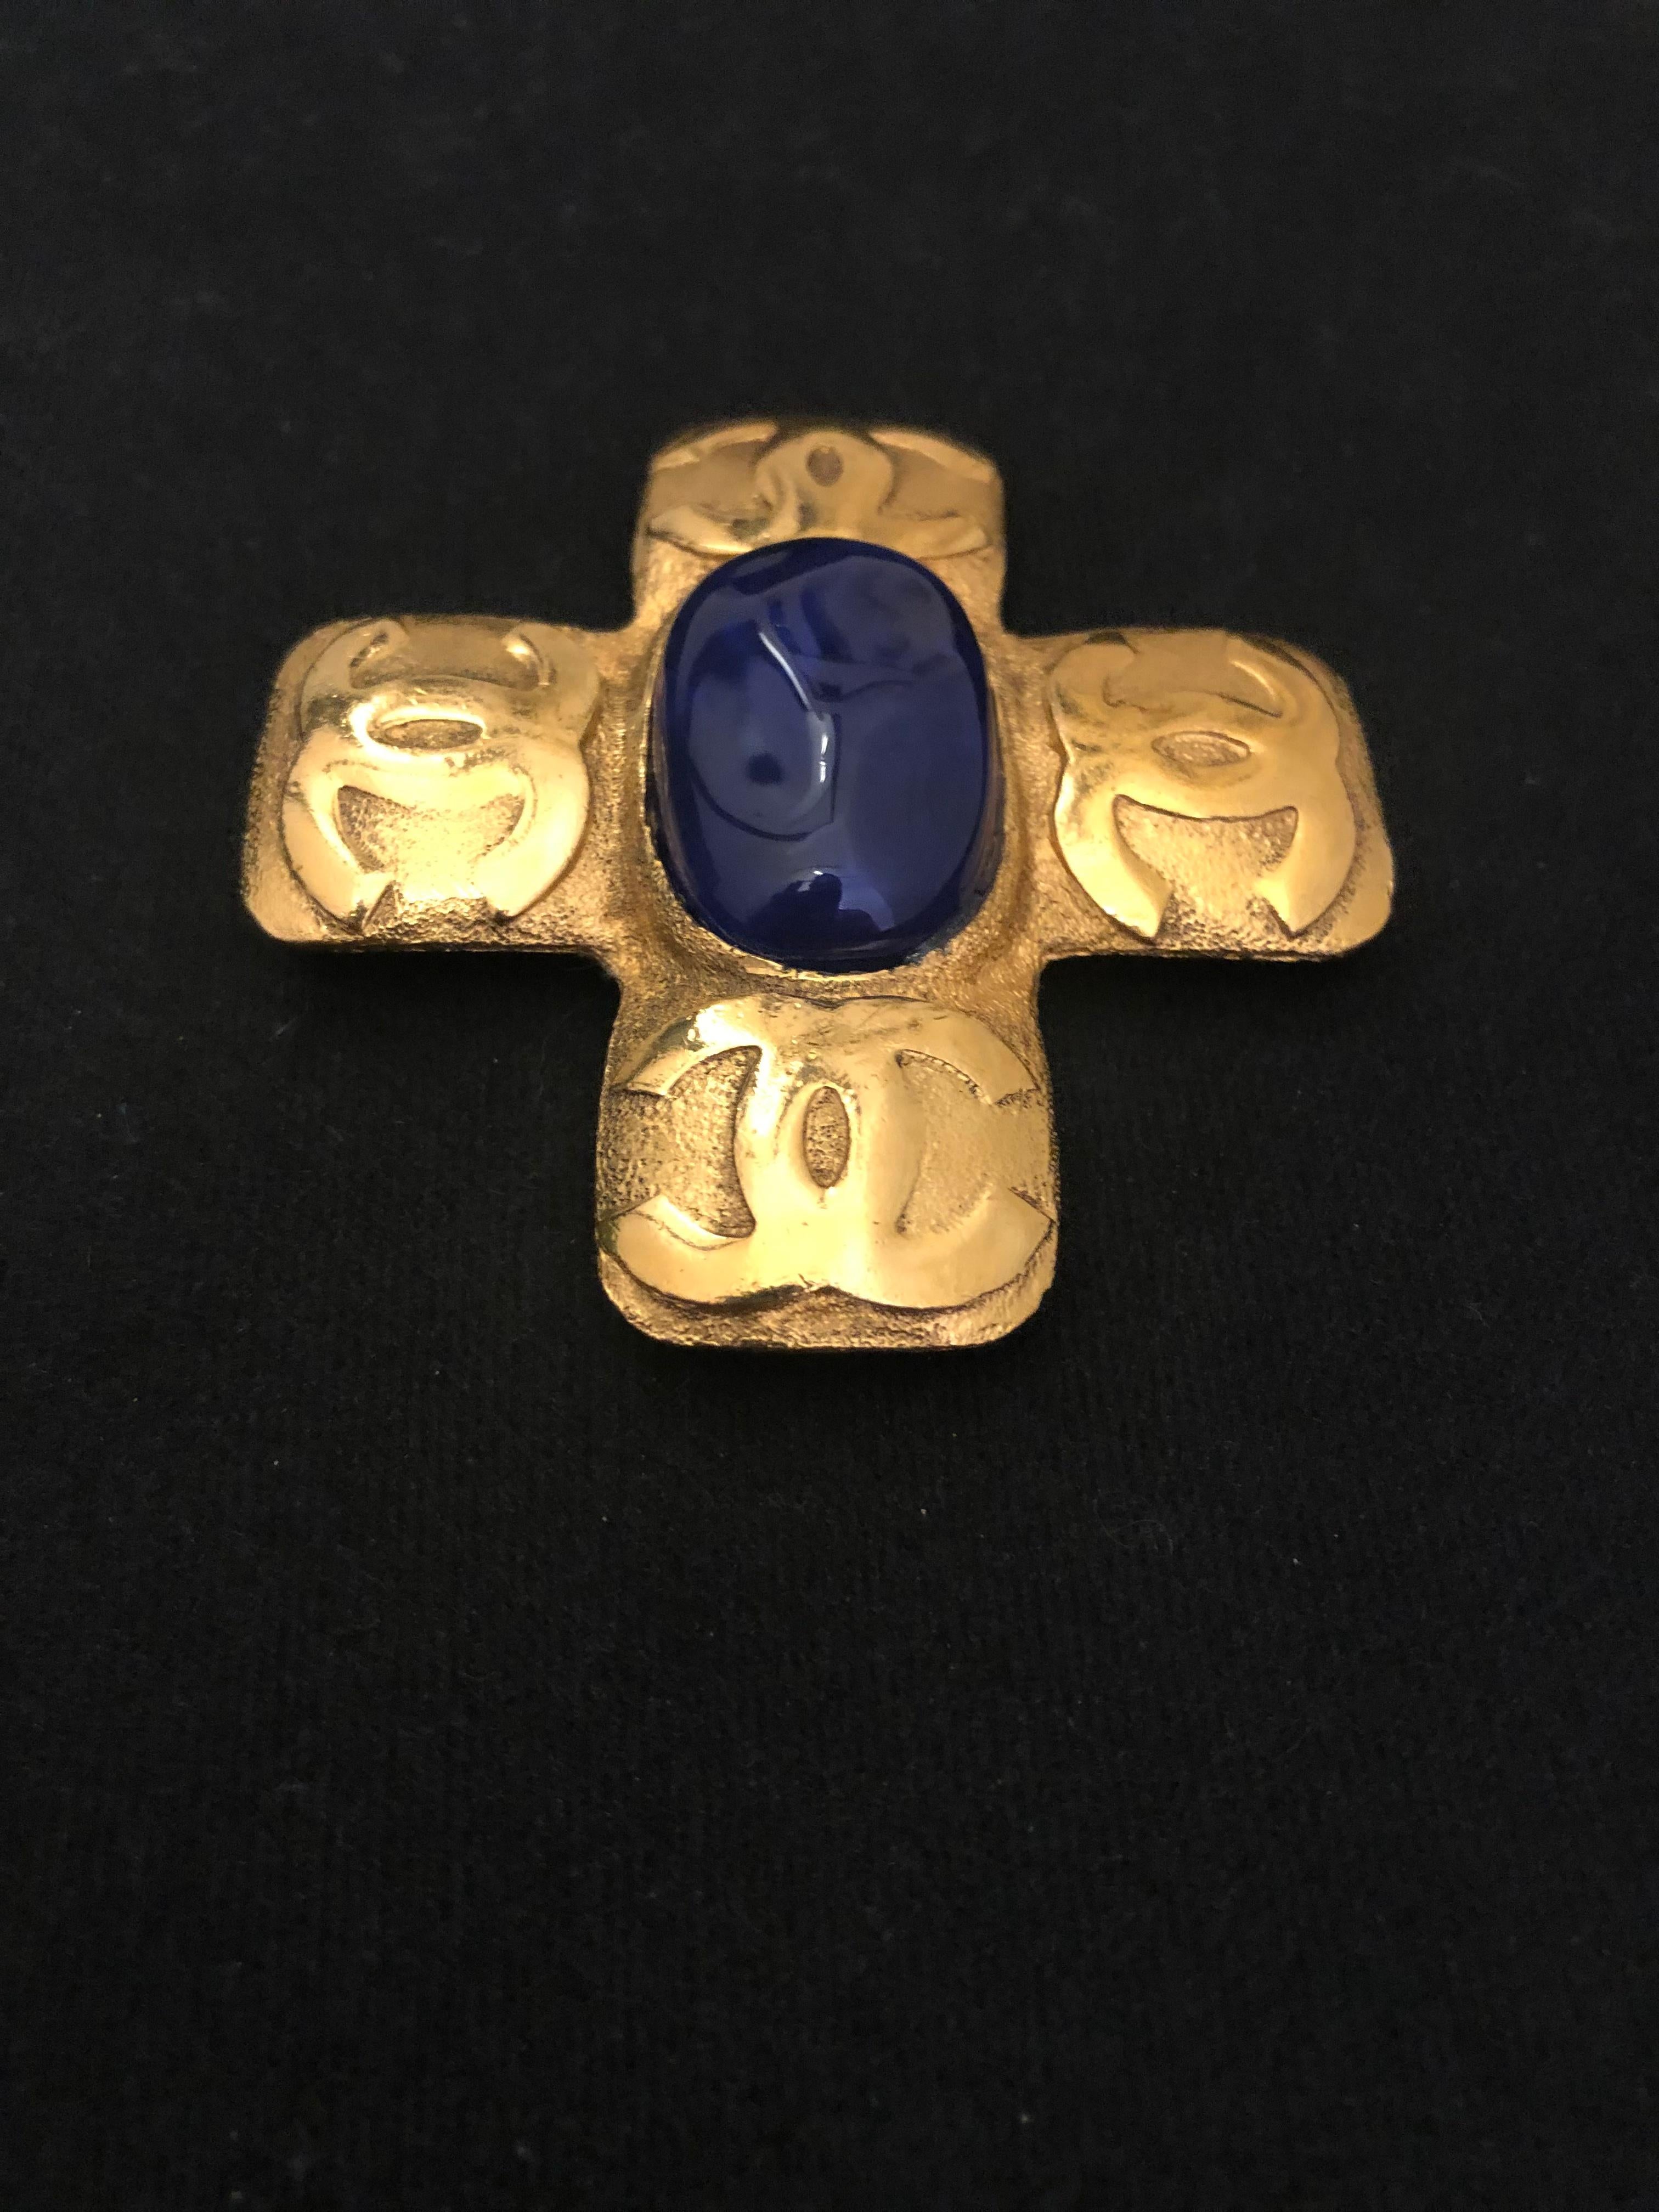 Early 1990s Chanel gold toned brooch featuring a cross decorated with four CC logos and centered a blue Gripoix. Stamped CHANEL 2 9 made in France. Measures approximately 6.7 x 6.2 cm. Comes with box. 

Condition: Minor signs of wear. Slight bent on